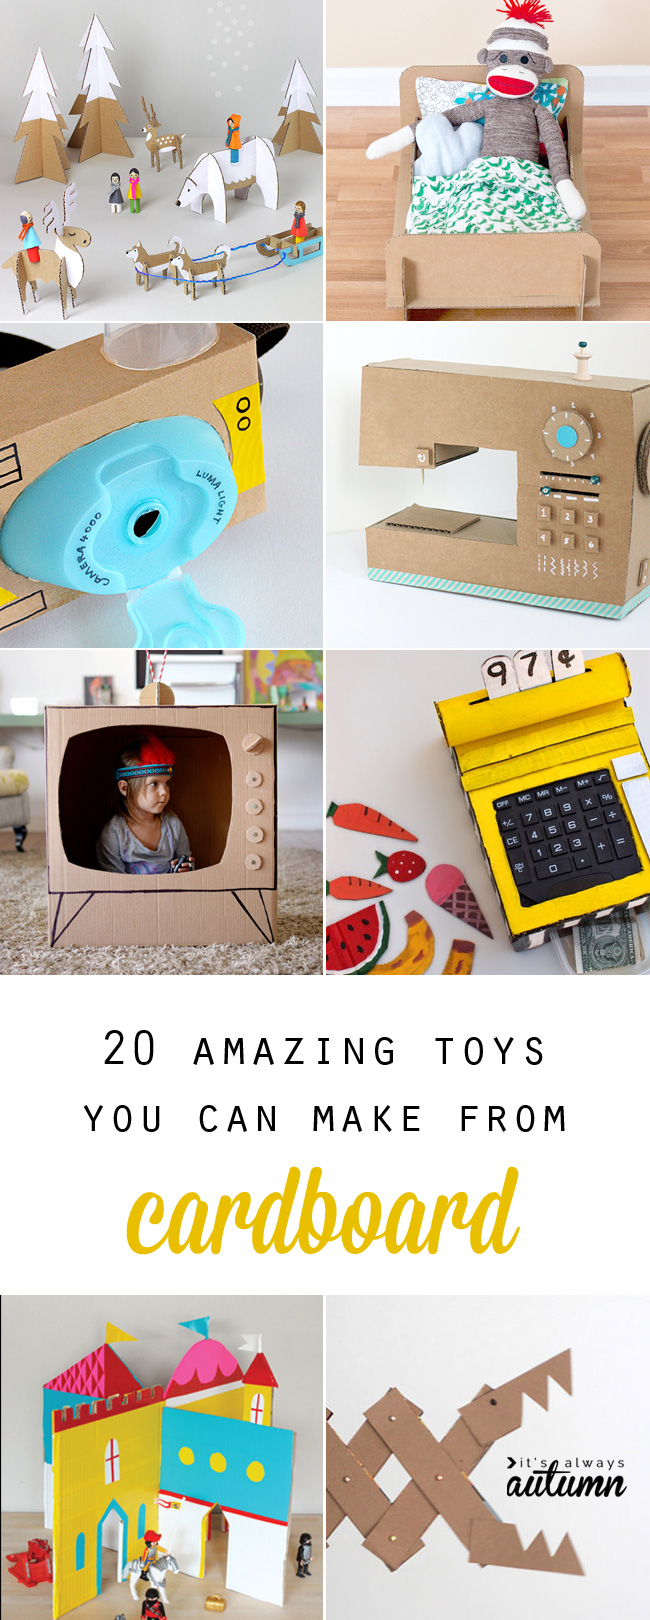 Easy DIY Toys to Make at Home, craft, DIY Toys Crafts You Can Make with  Kids